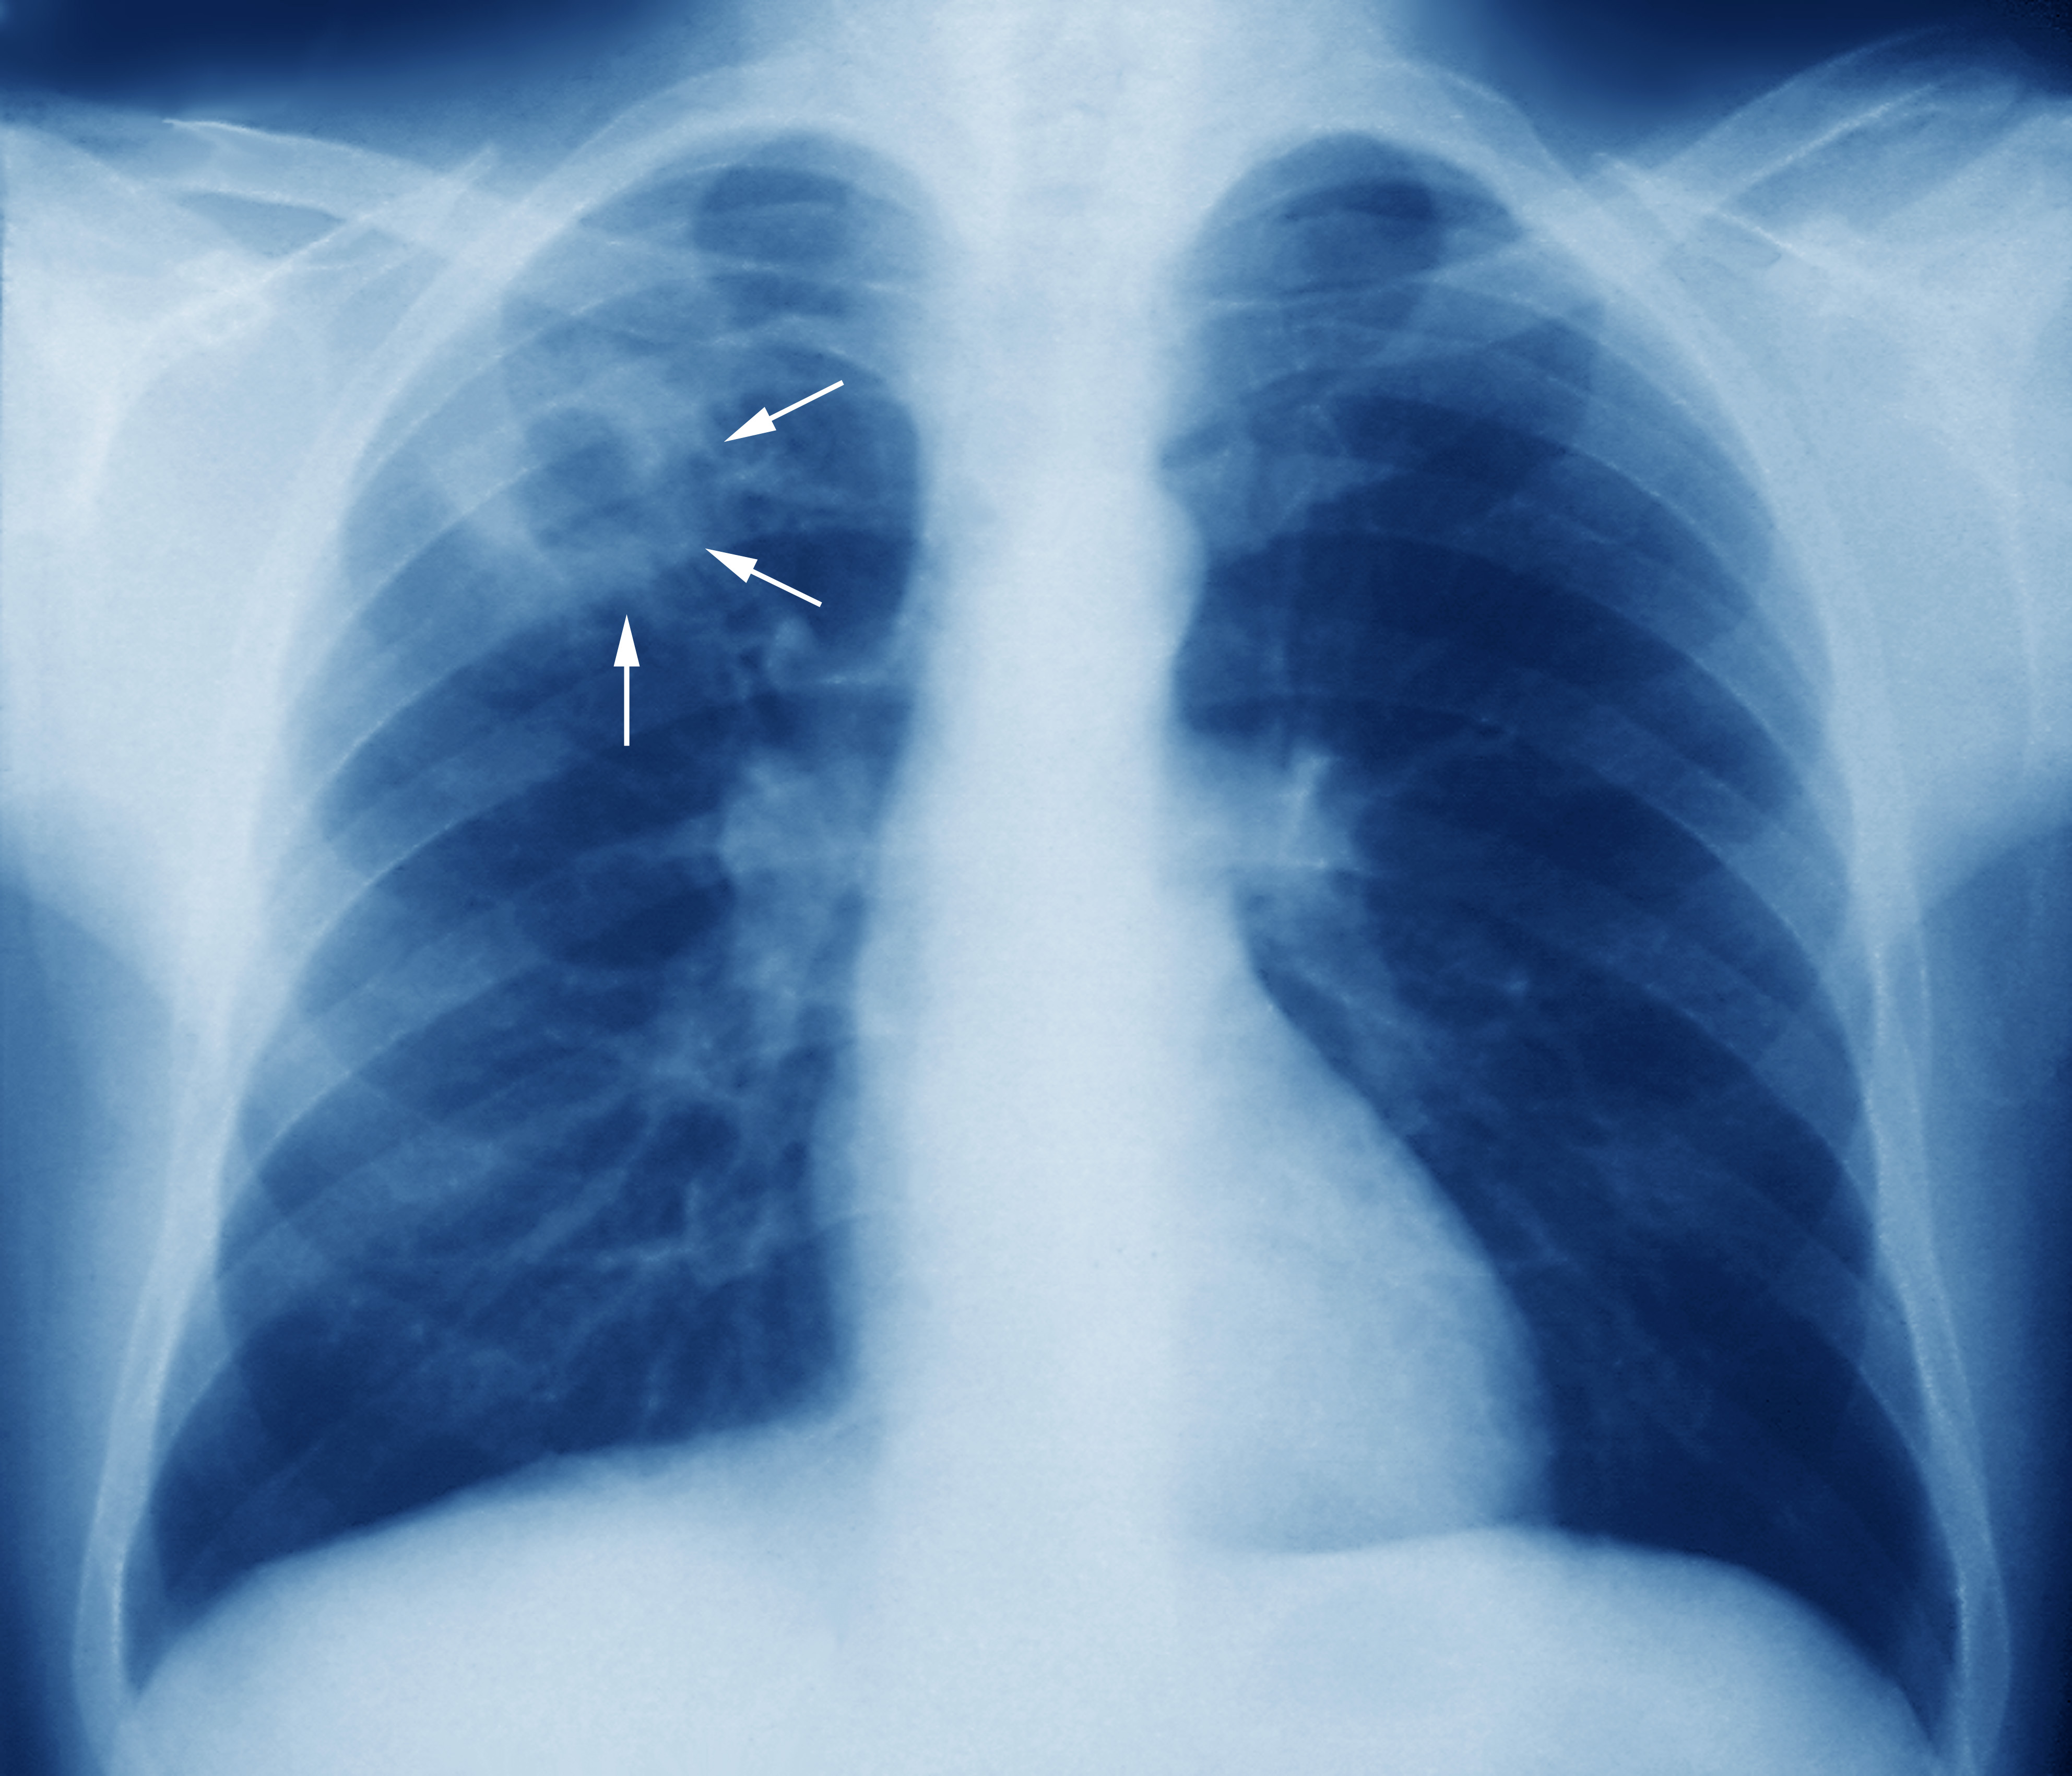 https://mednl.net/wp-content/uploads/2020/12/m2700245-tuberculosis-chest-x-ray-science-photo-library-high.jpg